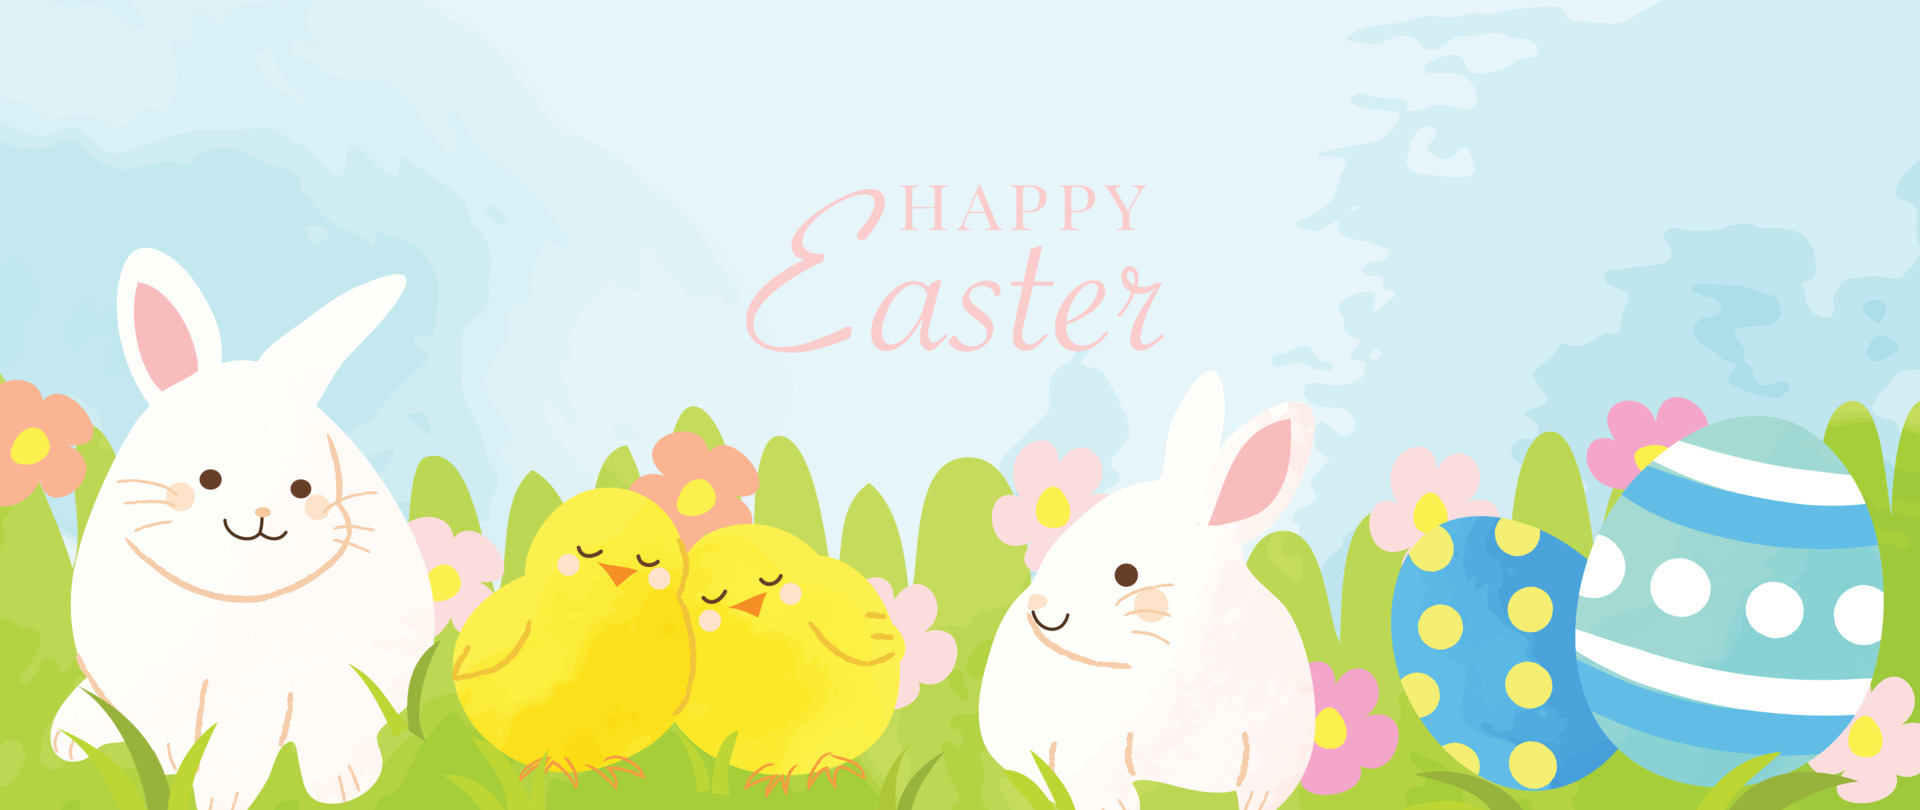 Happy Easter watercolor element background vector. Hand painted ...